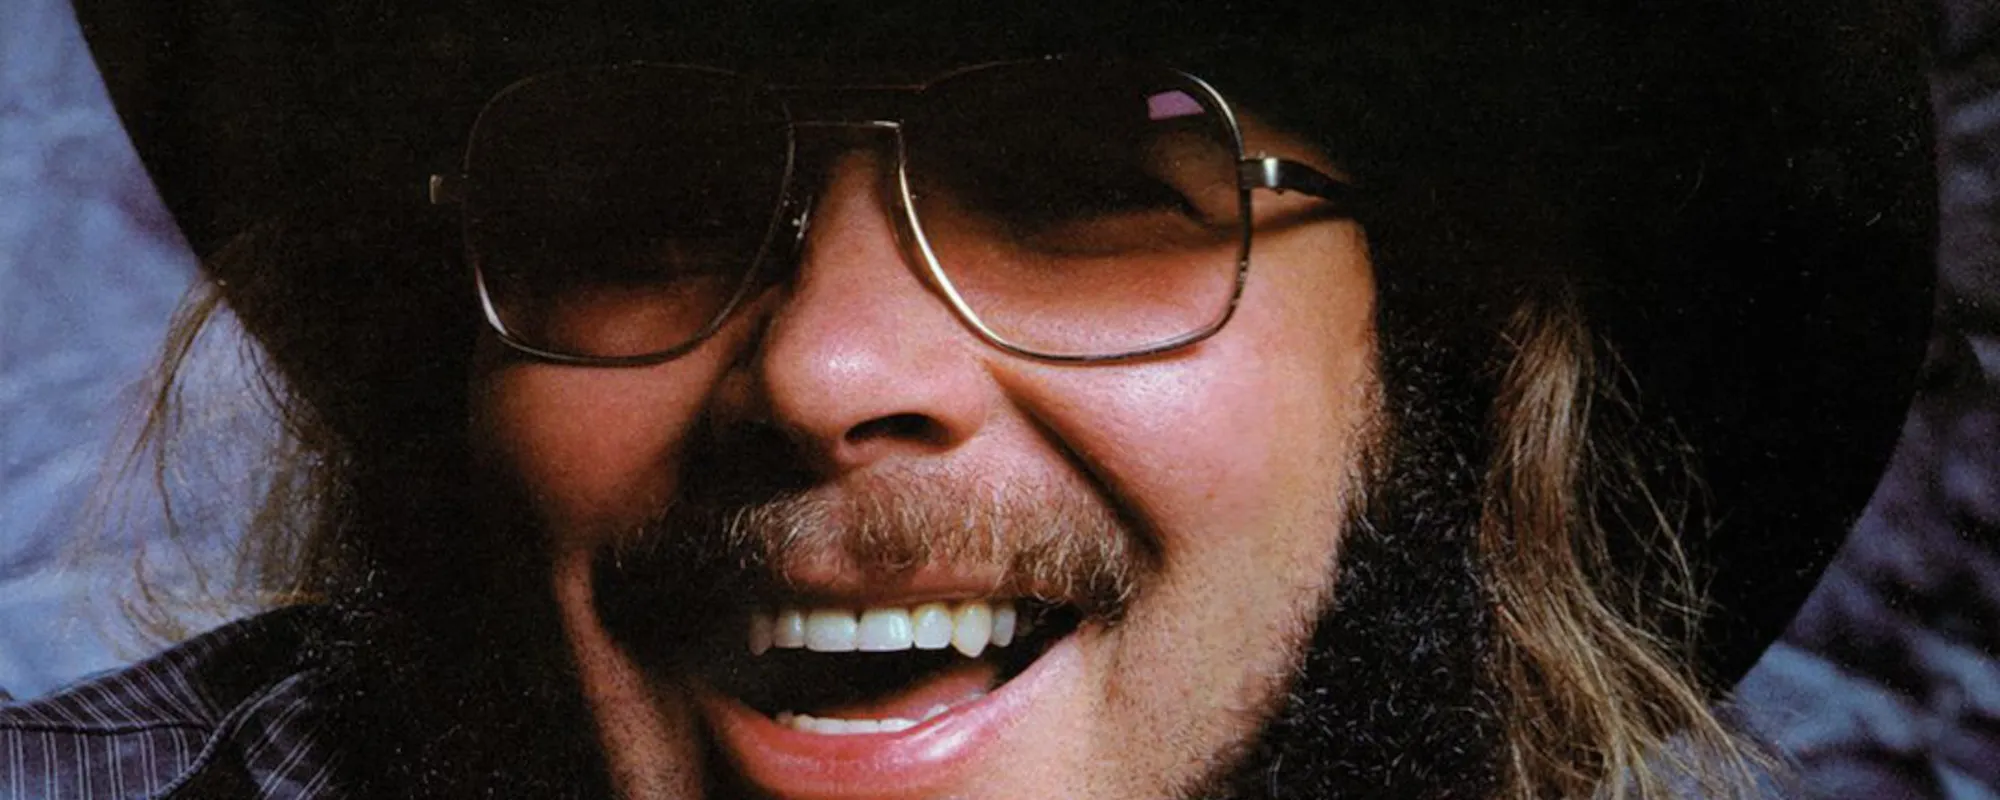 Behind the Song Lyrics: “A Country Boy Can Survive” by Hank Williams Jr.